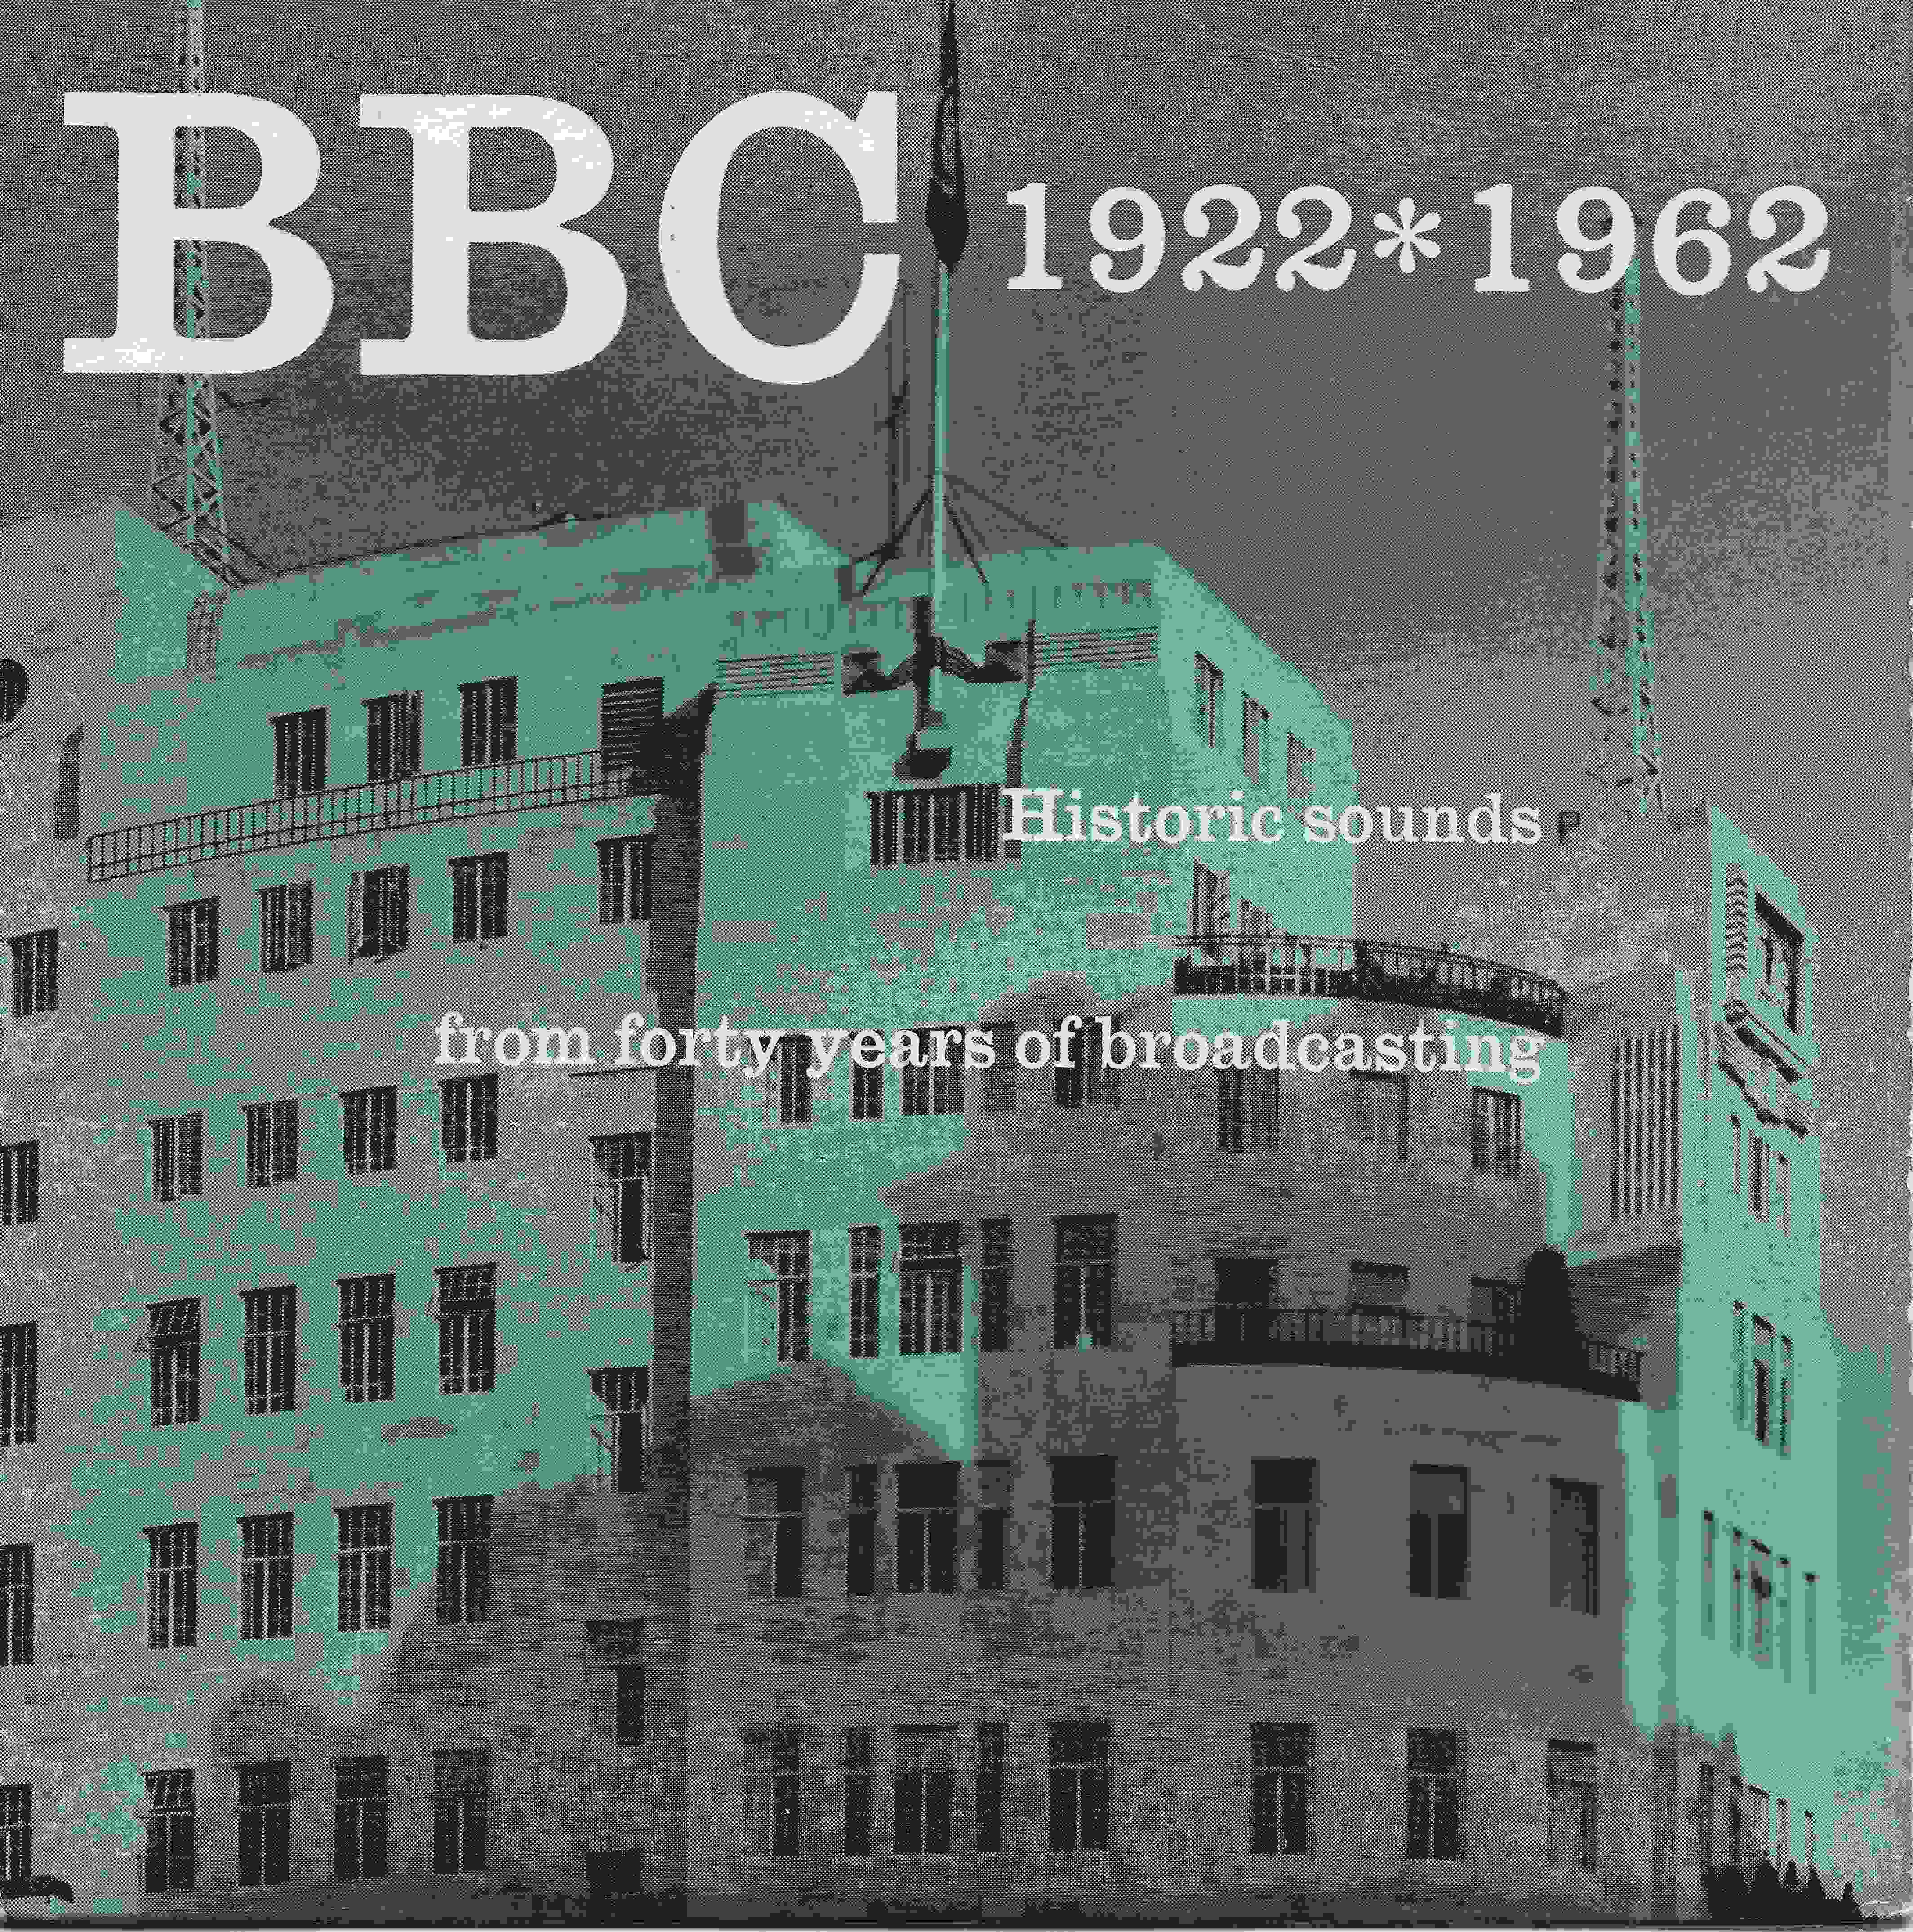 Picture of PD 1 BBC 1922*1962 - Historic sounds from forty years of broadcasting single by artist Various from the BBC records and Tapes library